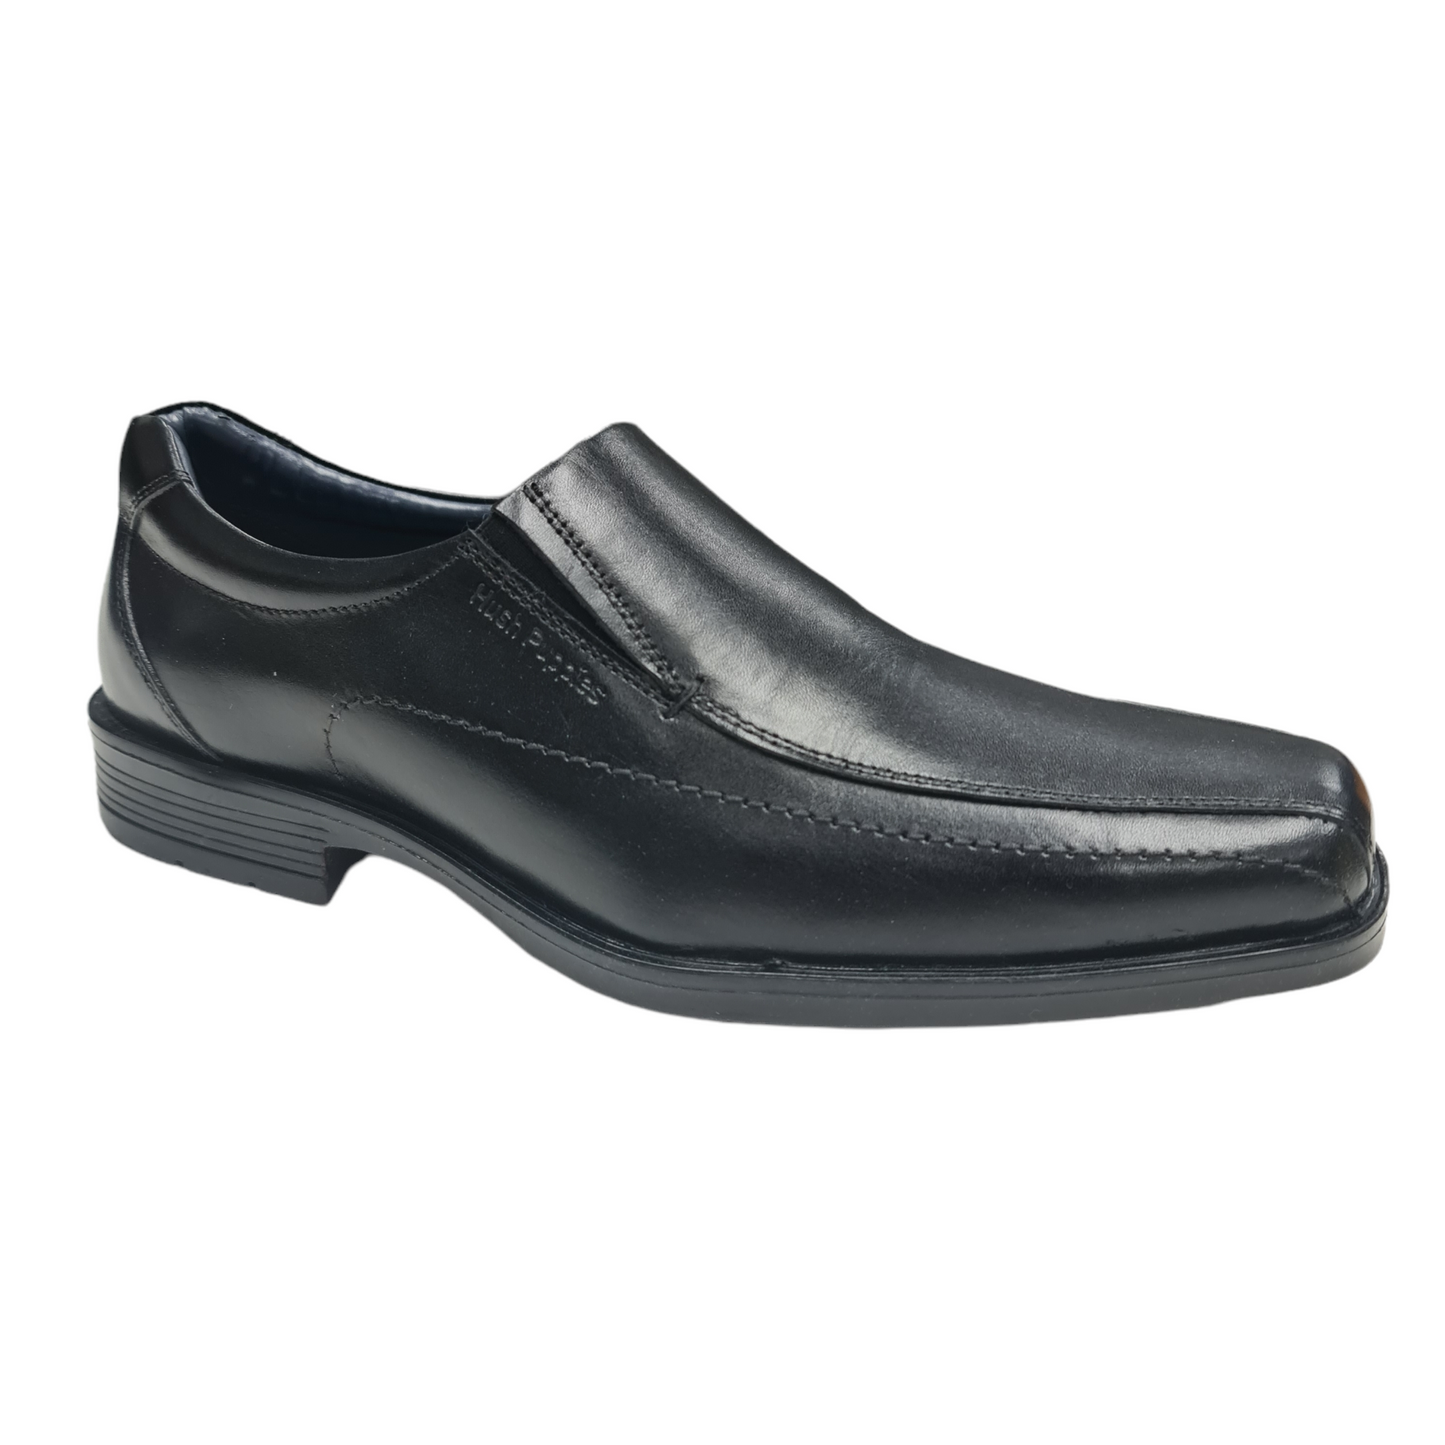 Hush Puppies Brody Black Shoes